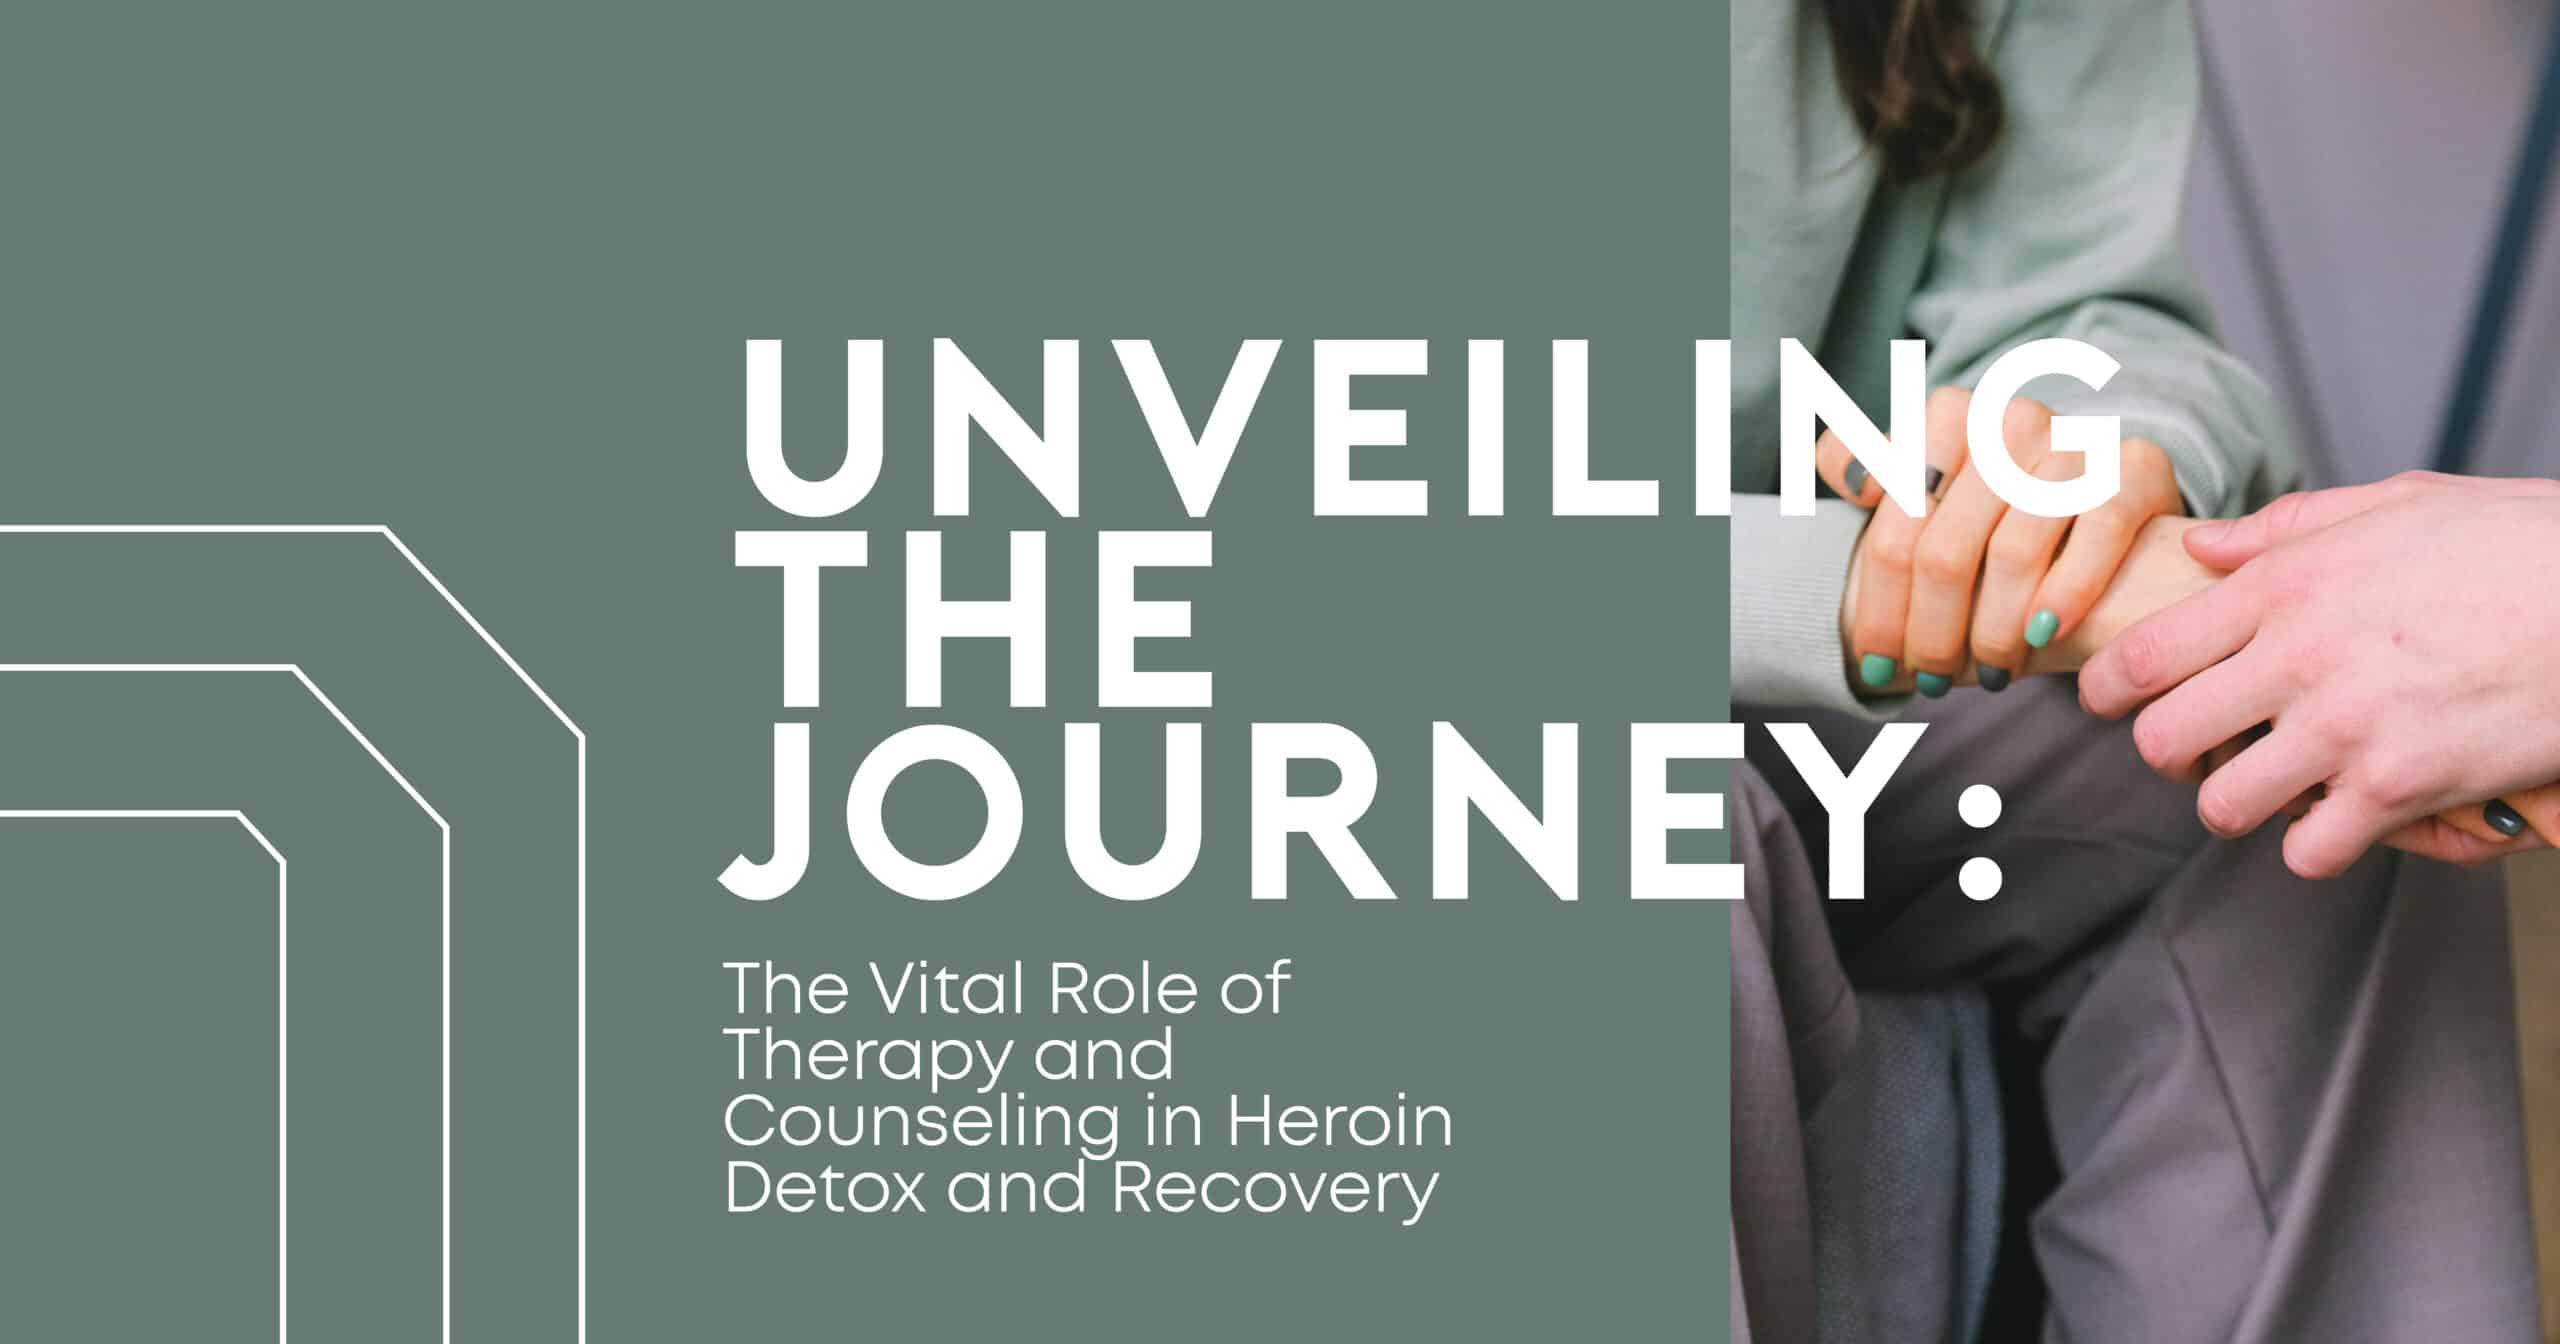 Counseling in Heroin Detox and Recovery